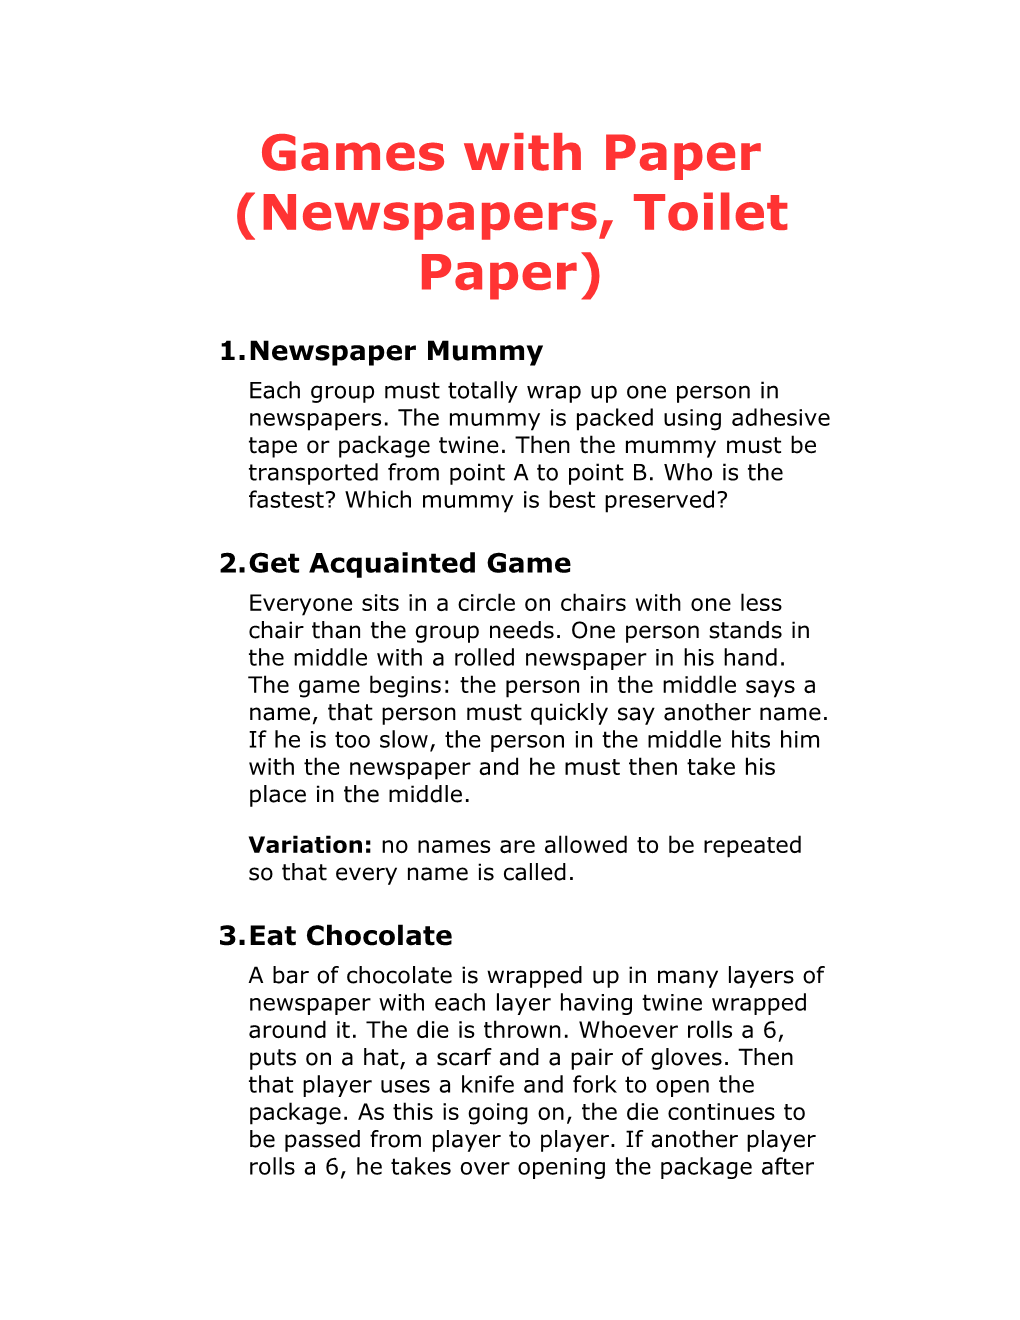 Games with Paper (Newspapers, Toilet Paper)